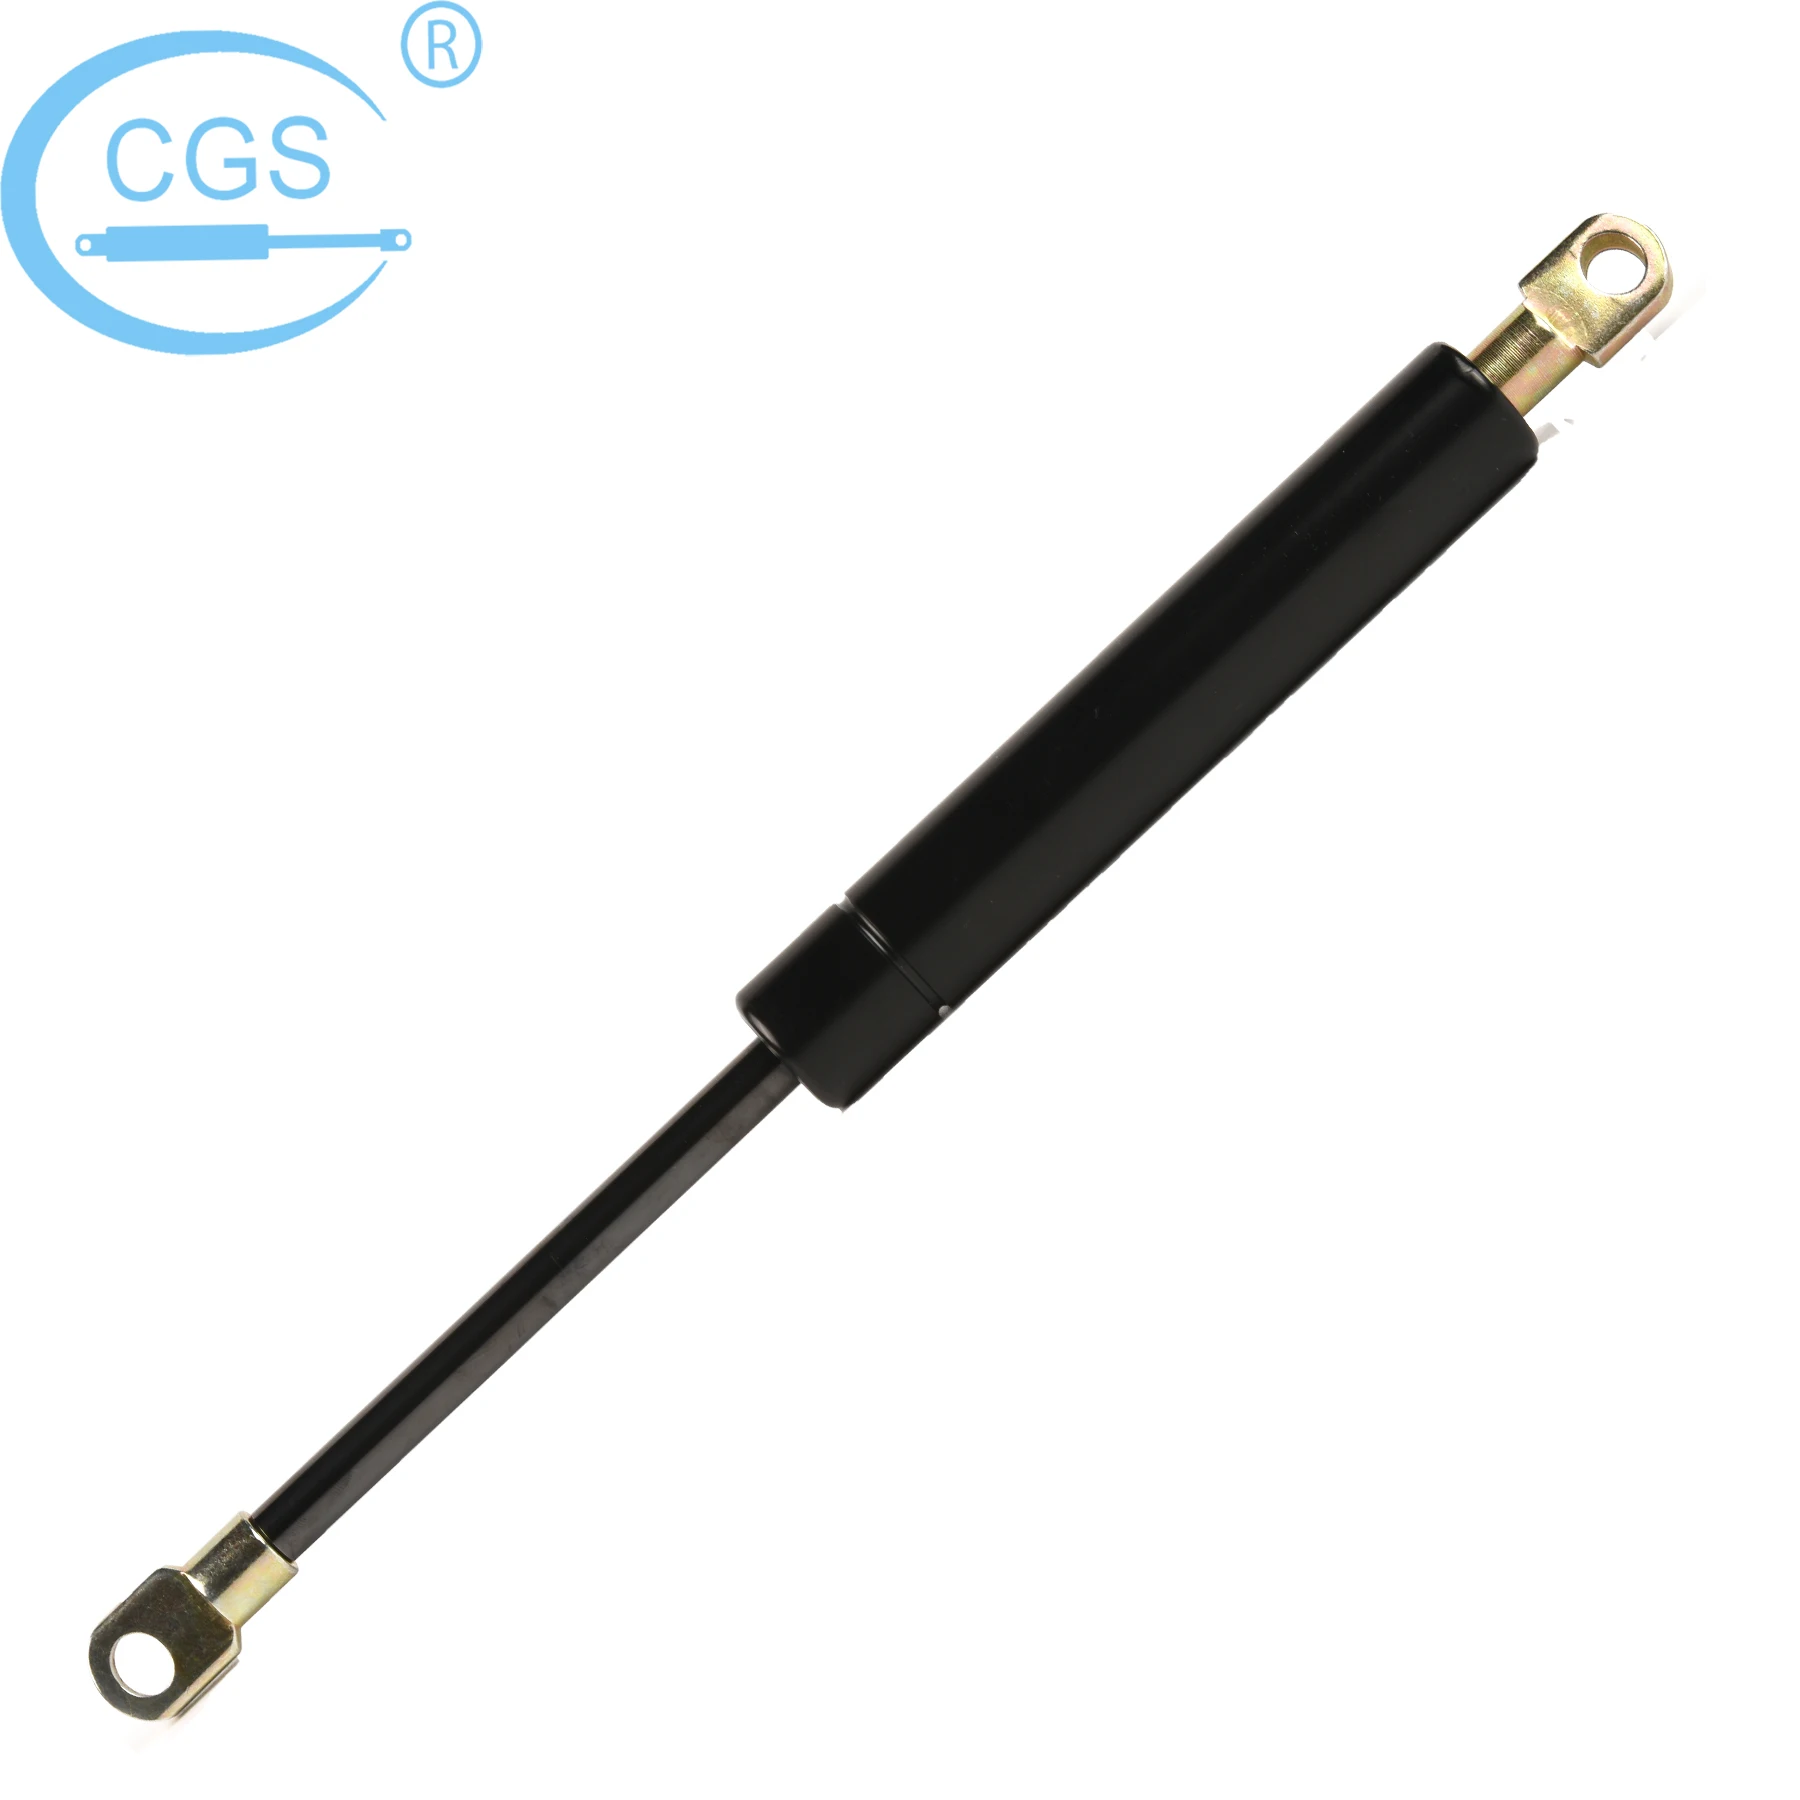 

Hot sell gas spring struts gas lift for car chair furniture bed